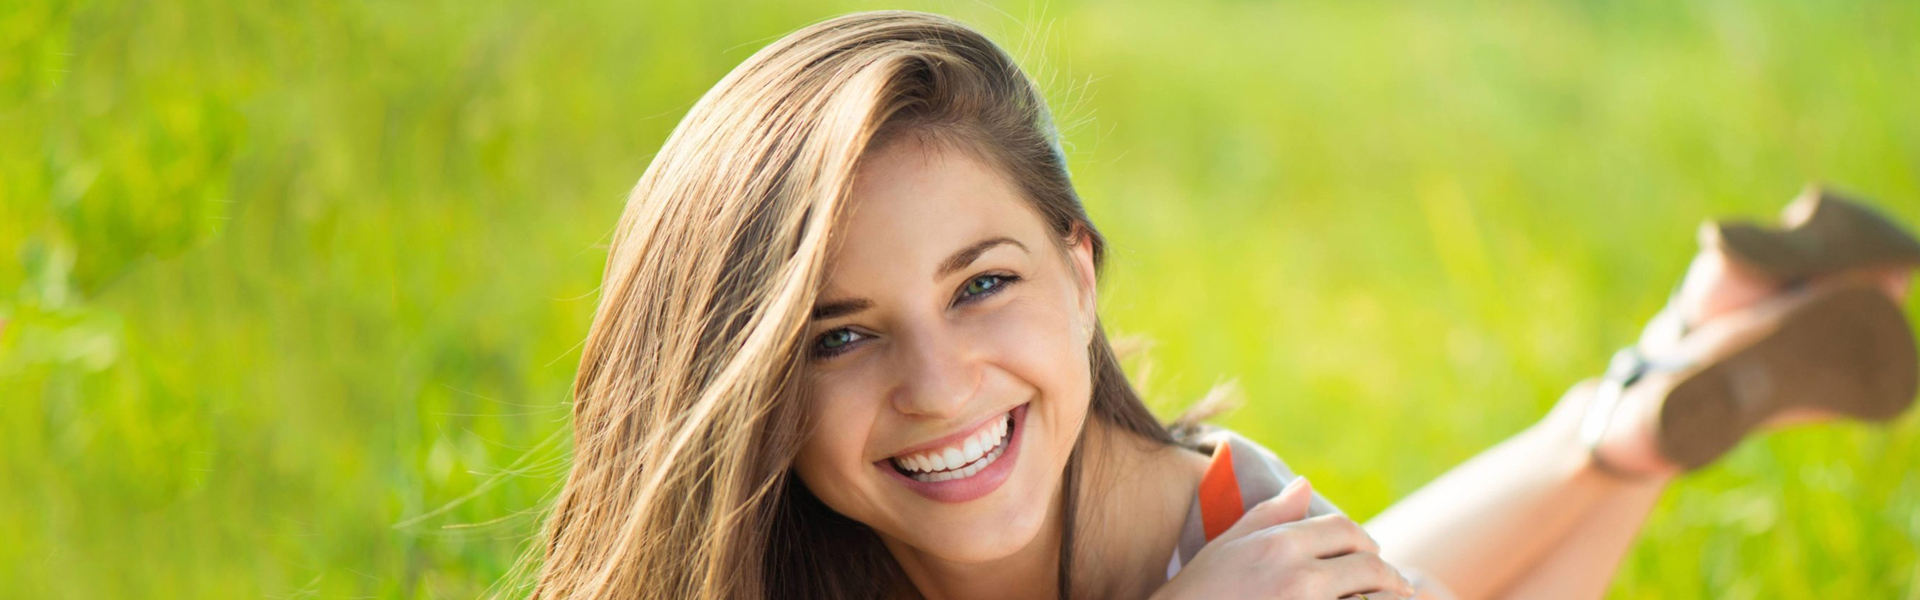 Restorative Dentistry Can Bring Your Smile Back to Life